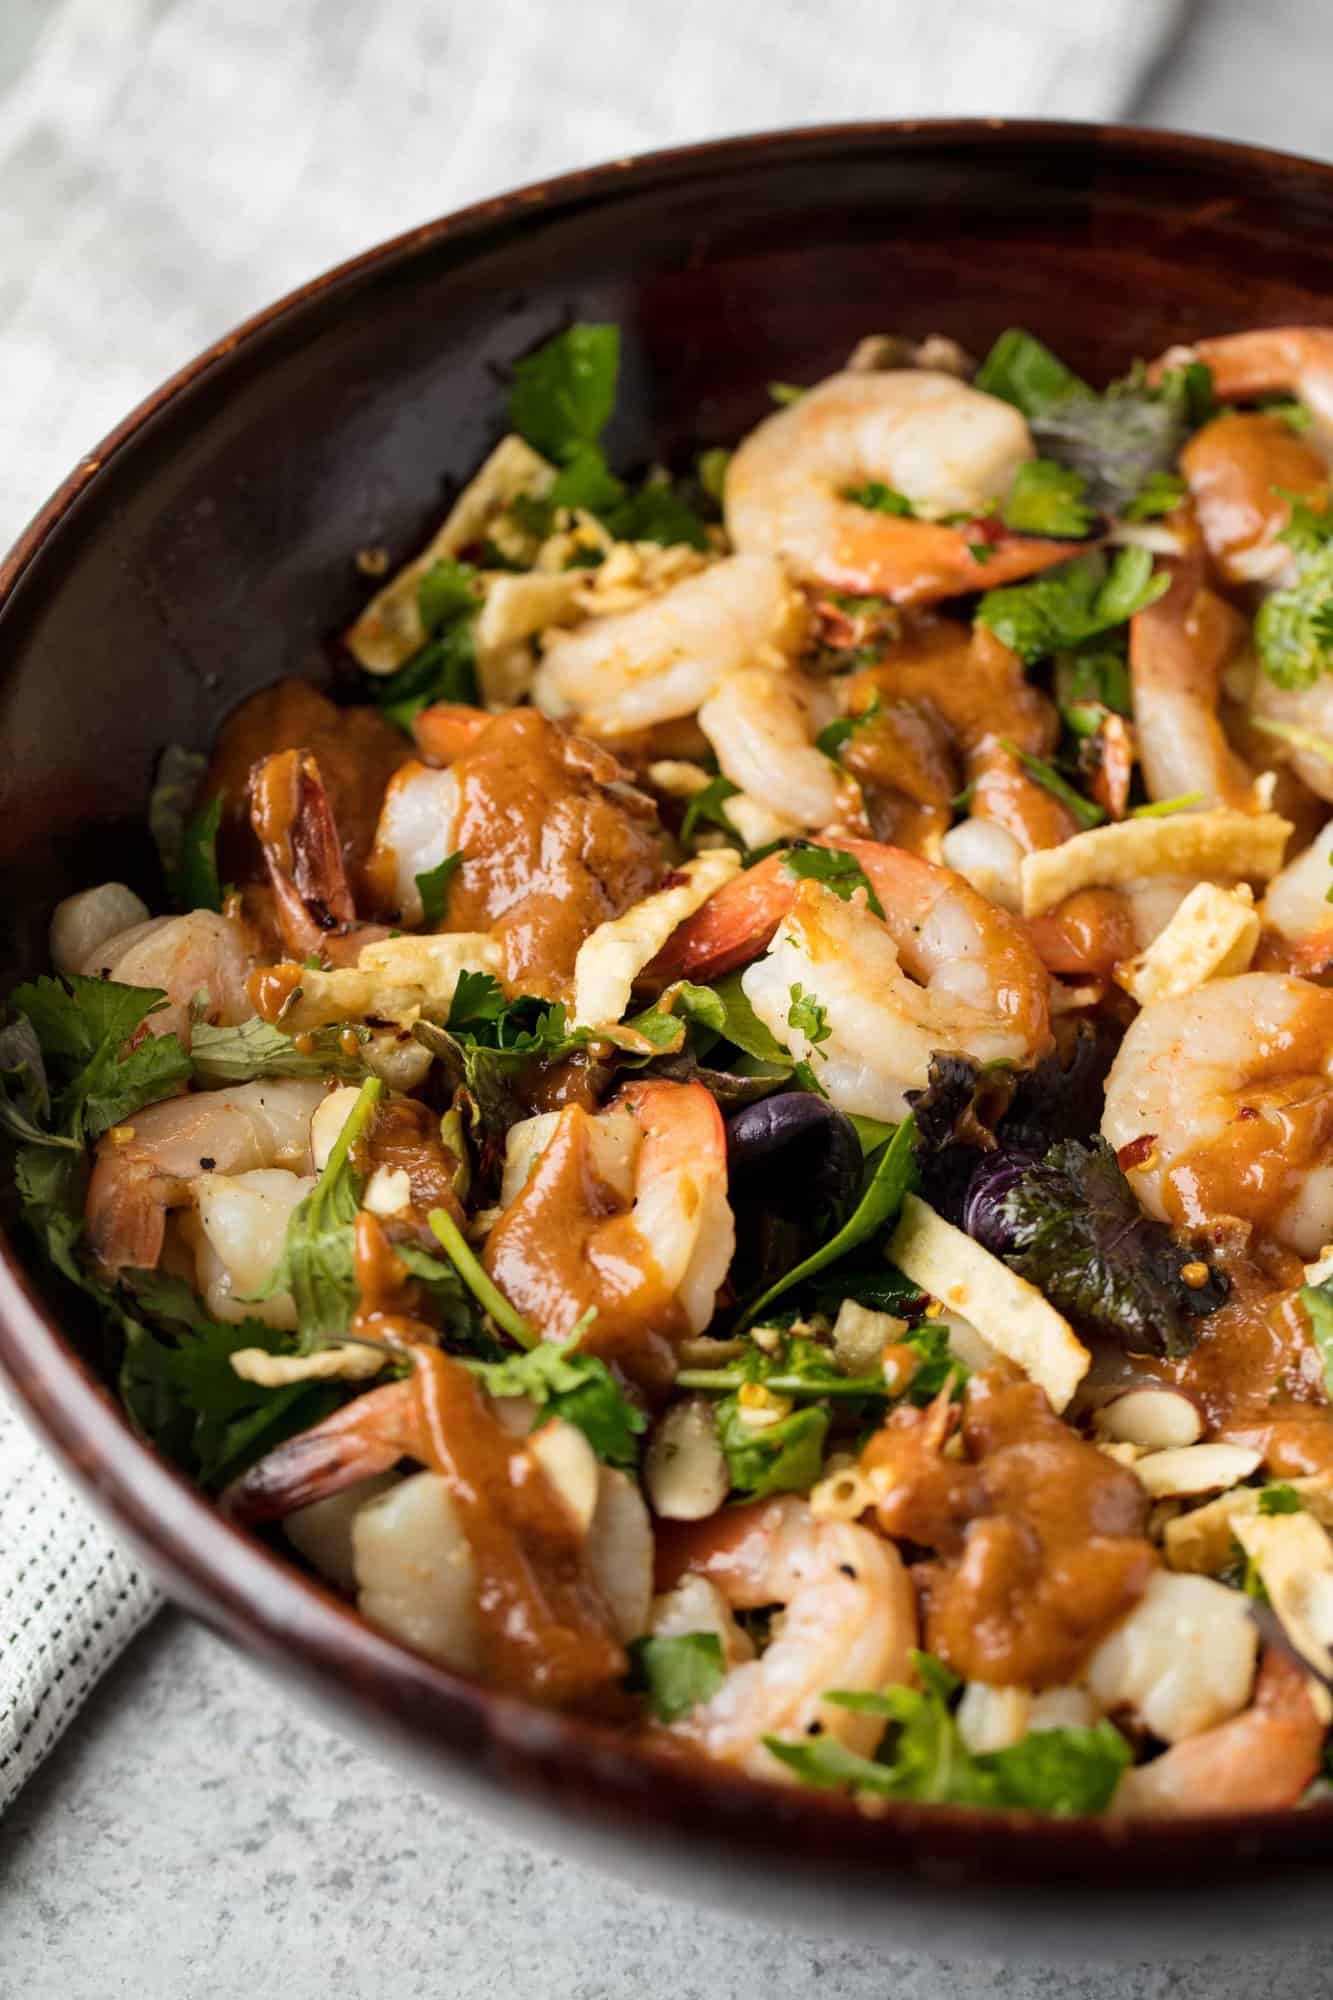 This easy Thai Shrimp Salad comes together in less than 15 minutes making it a great option for a weeknight meal. It's light, refreshing, and oh so tasty!